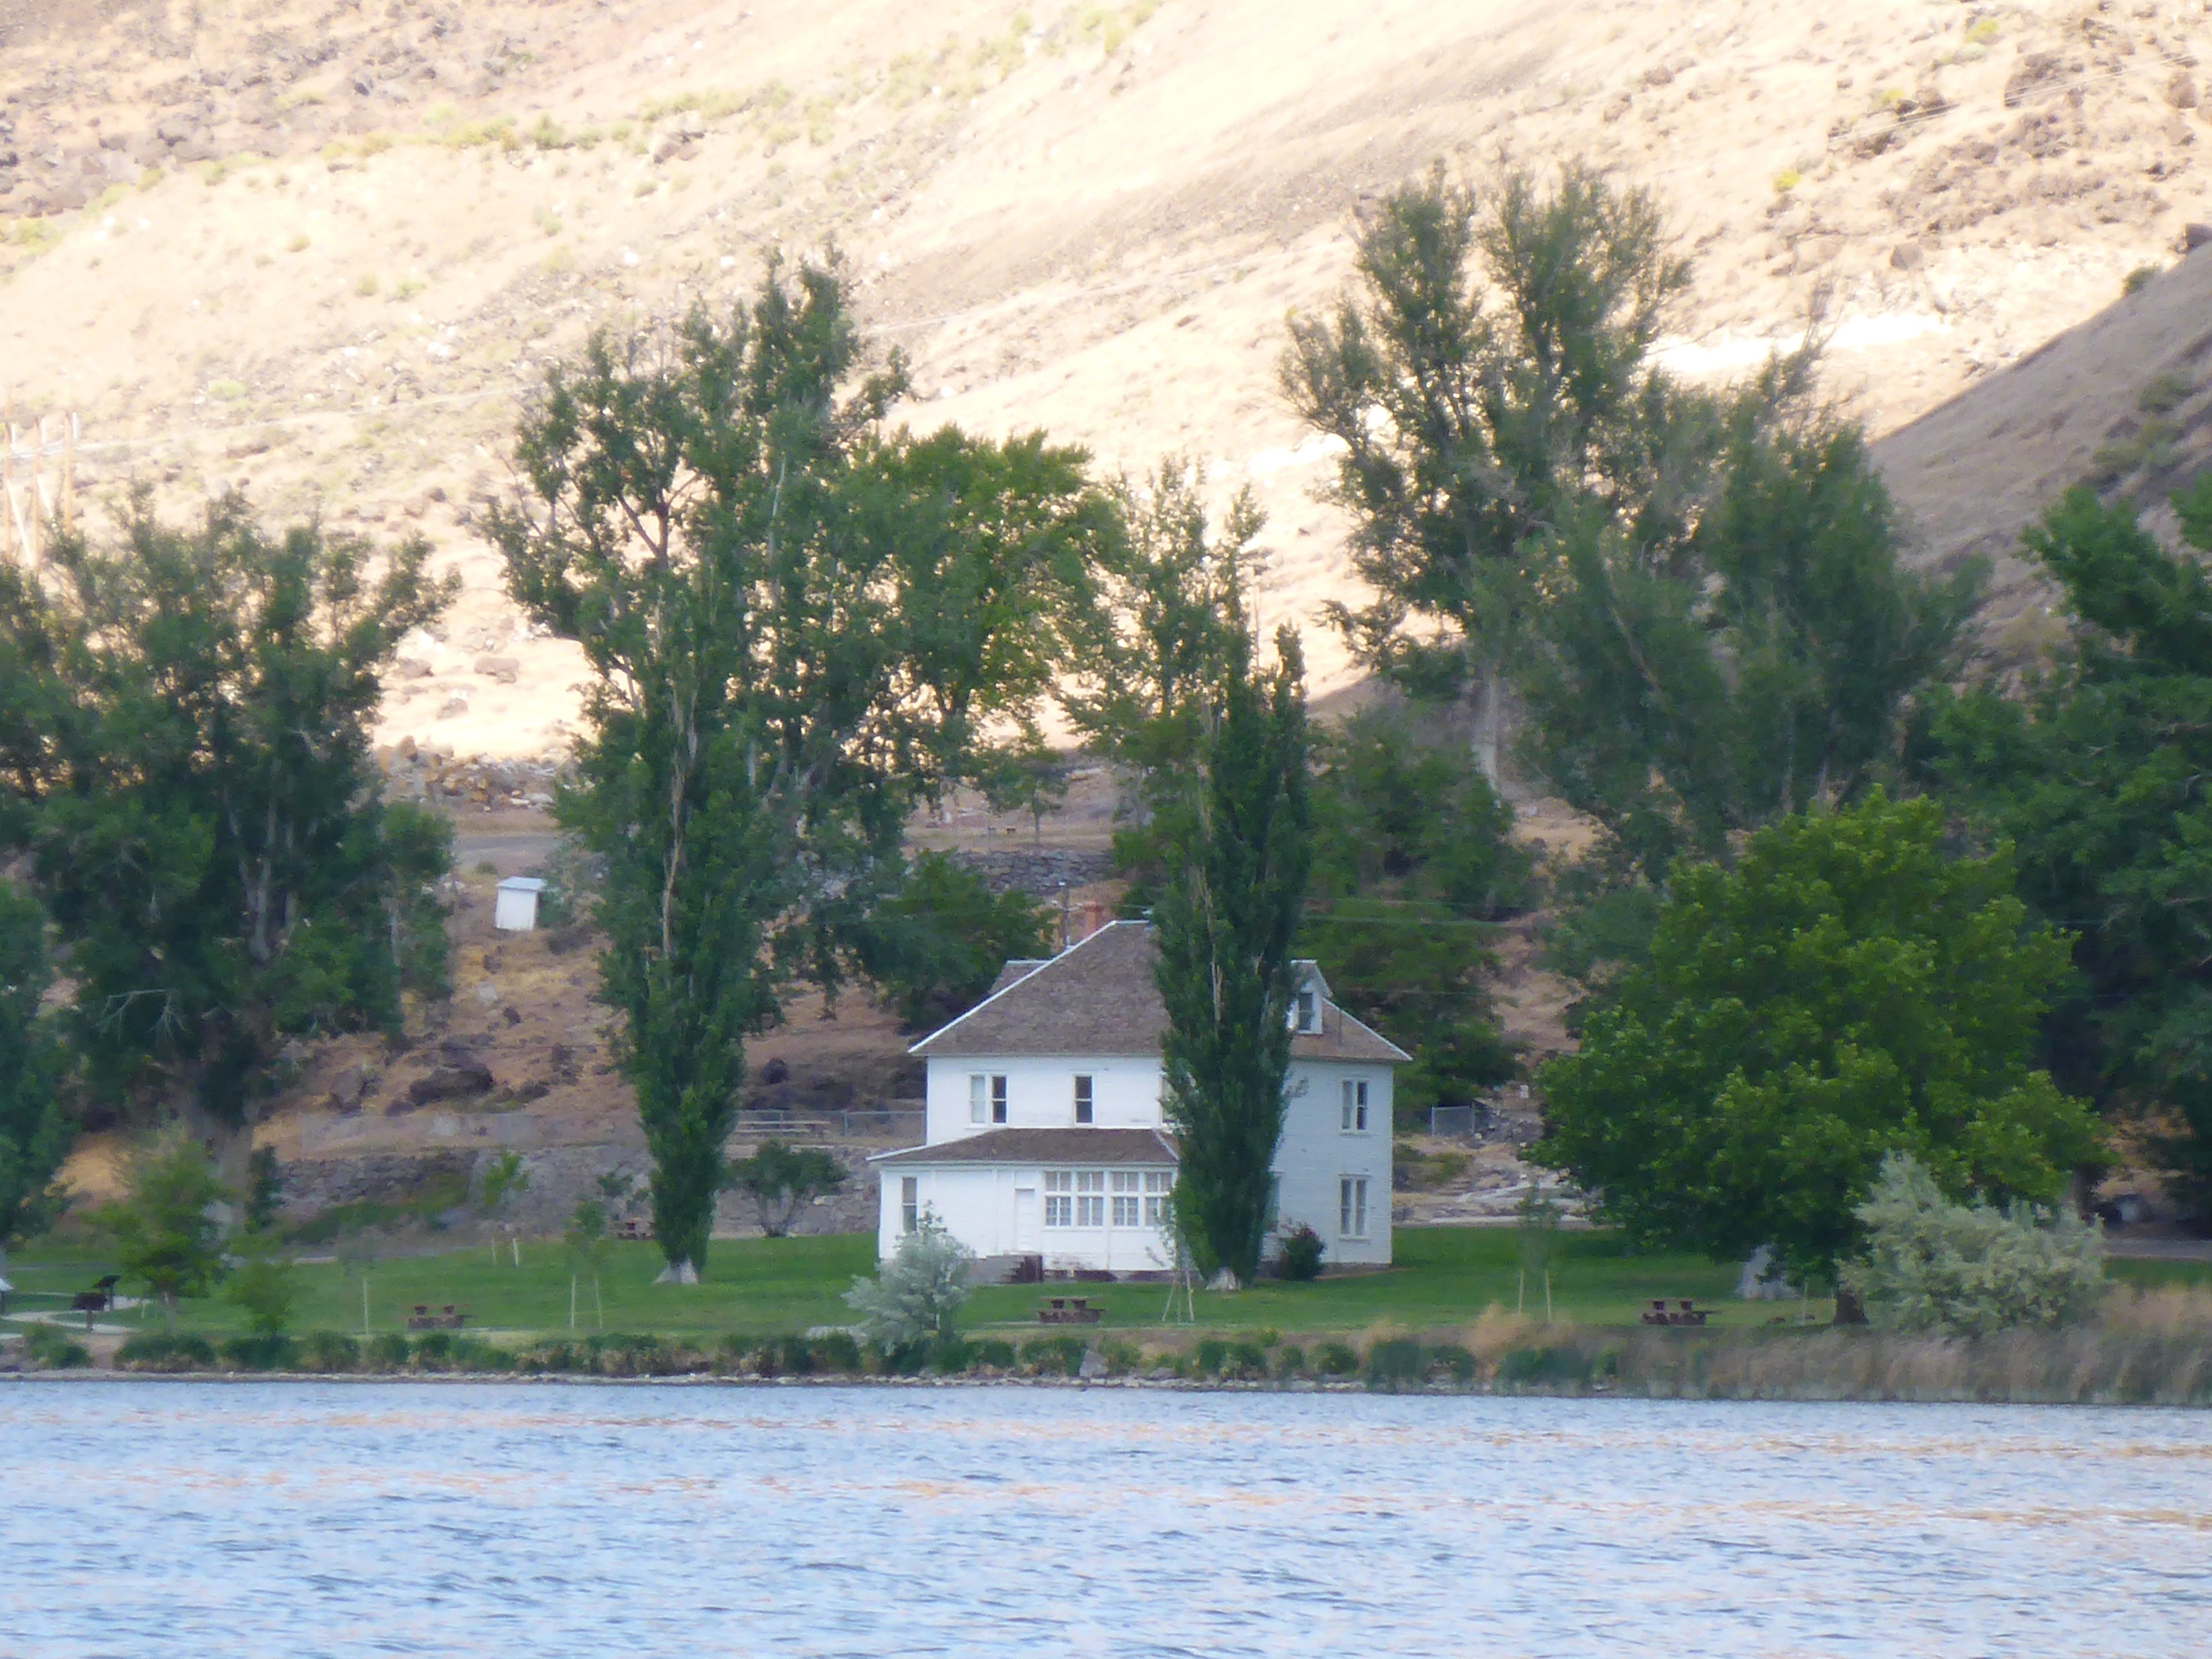 View from the river. 